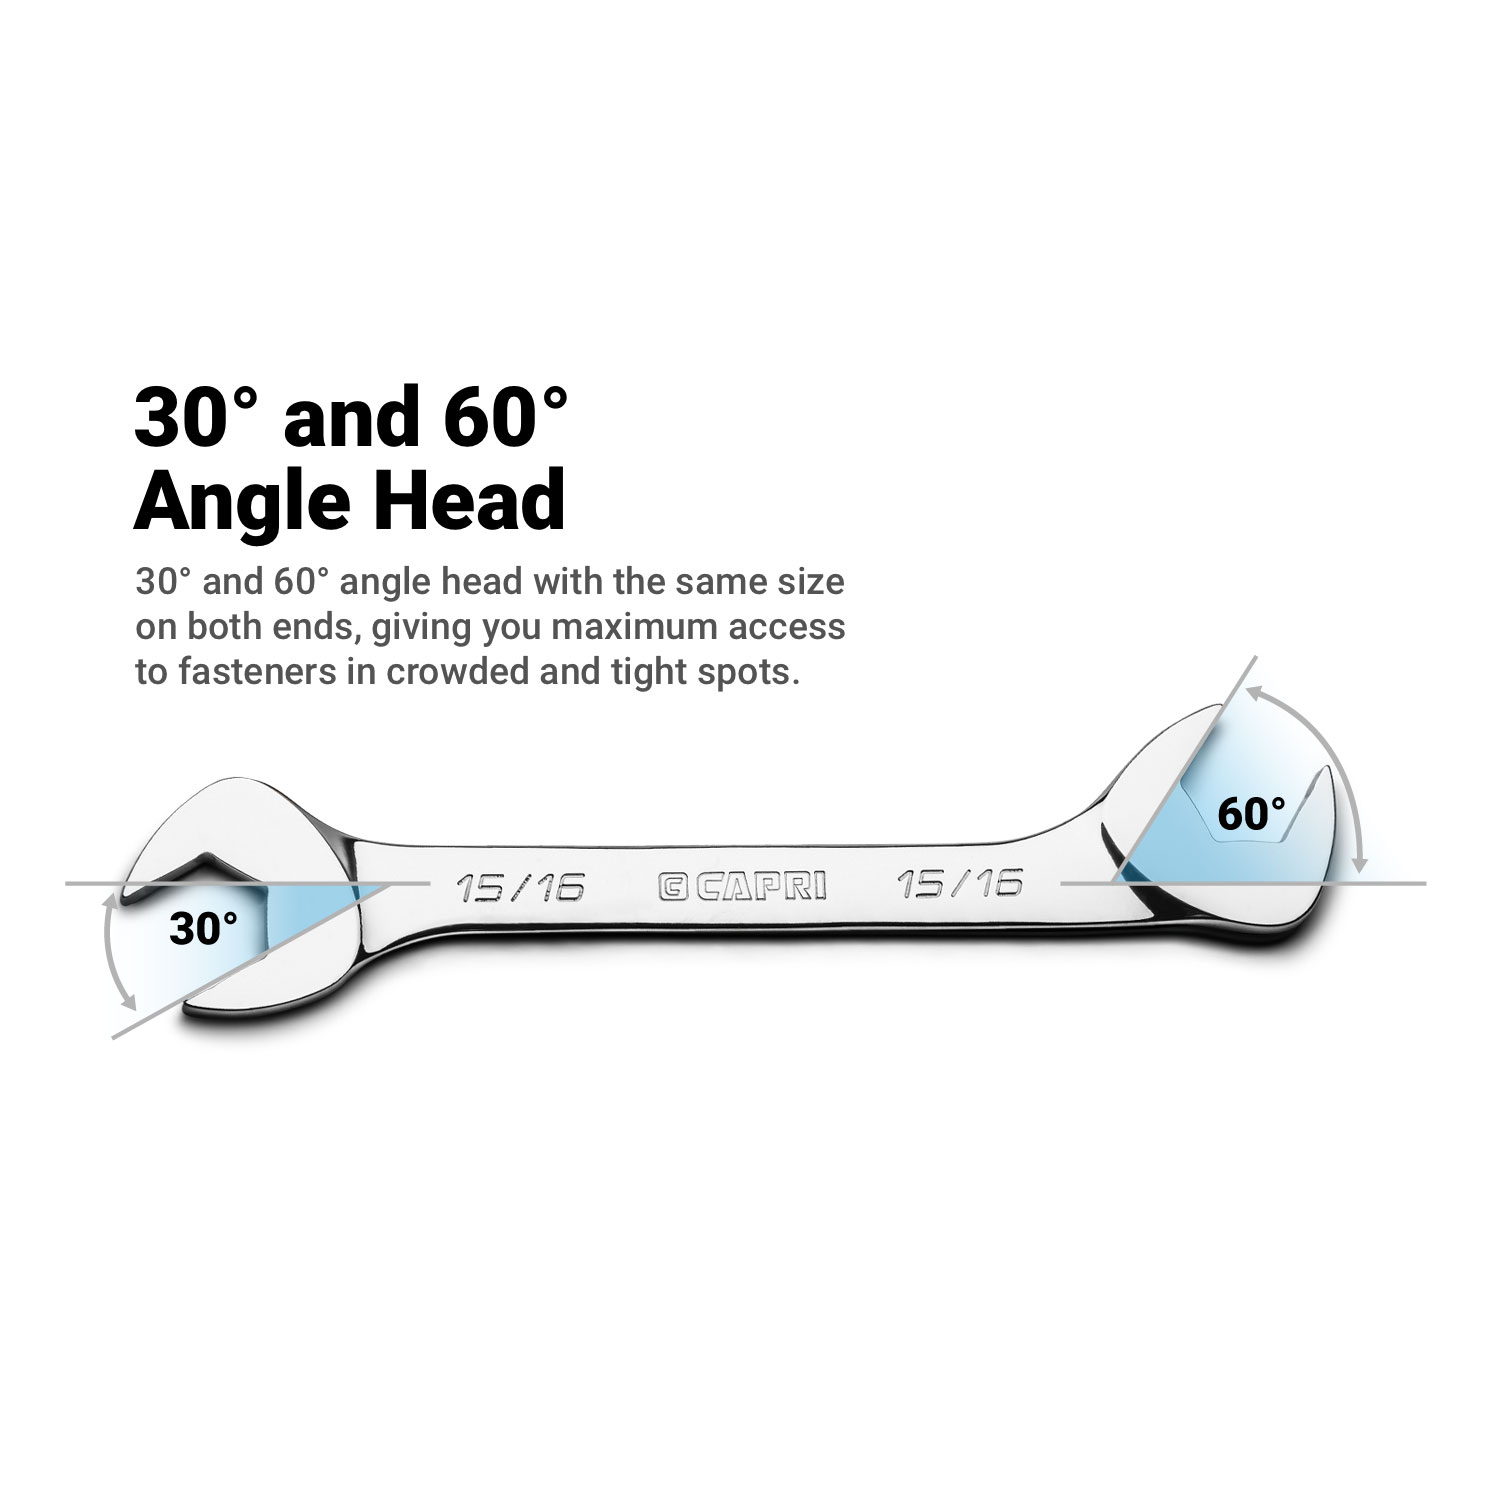 Capri Tools 3/4 in. Angle Open End Wrench, 30Â° and 60Â° angles, SAE